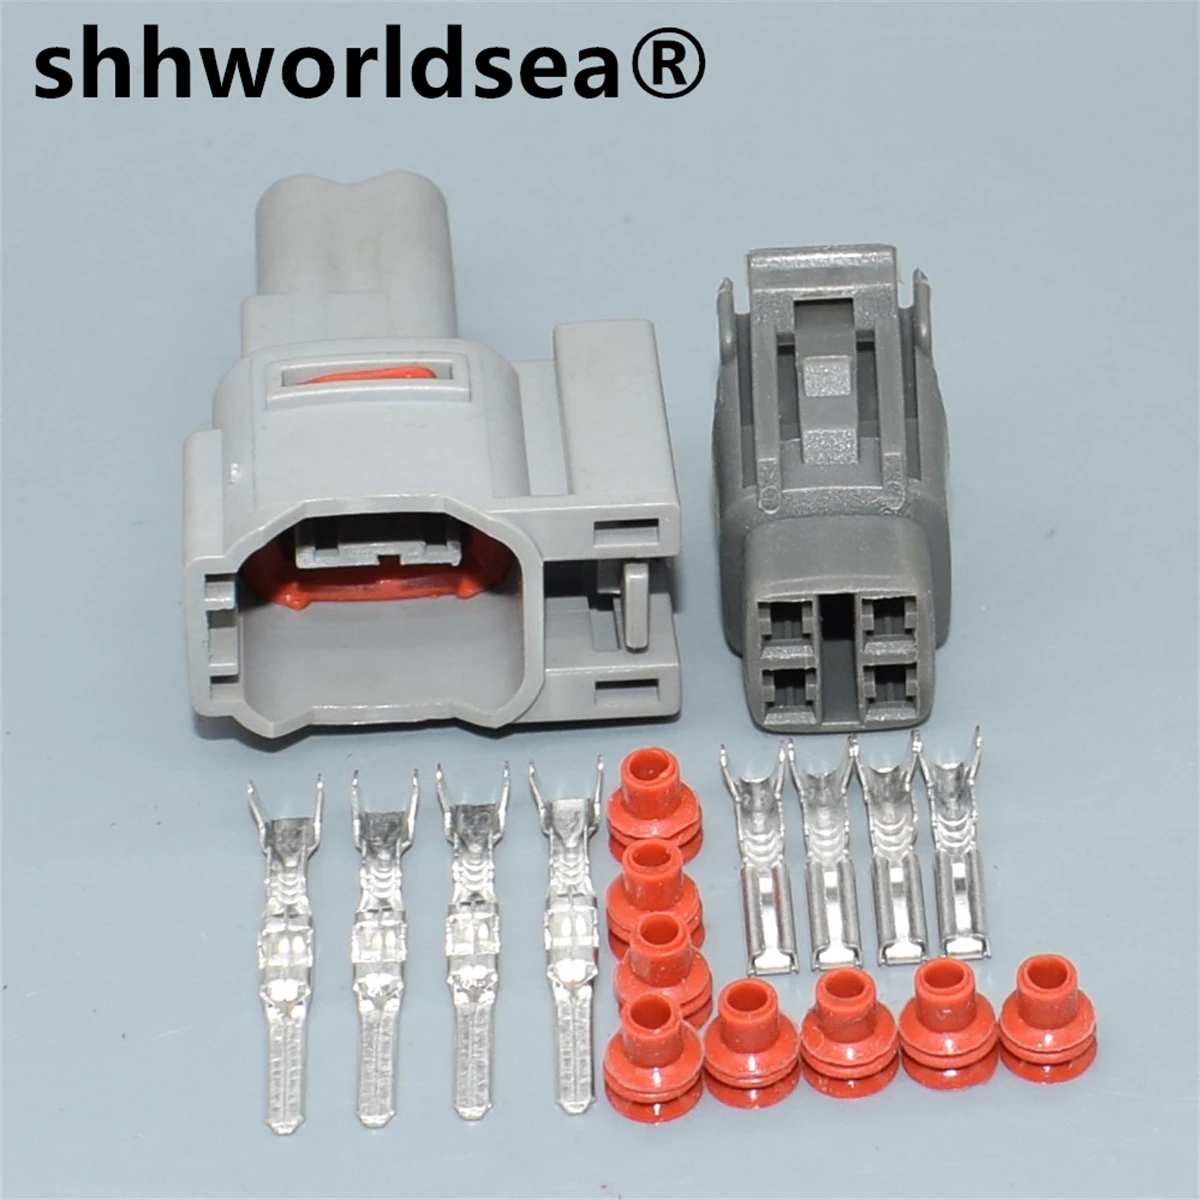 

shhworldsea Auto 4pin 2.2mm plug 6189-0381 90980-11037 9098011037 wiring cable harness connector with terminal